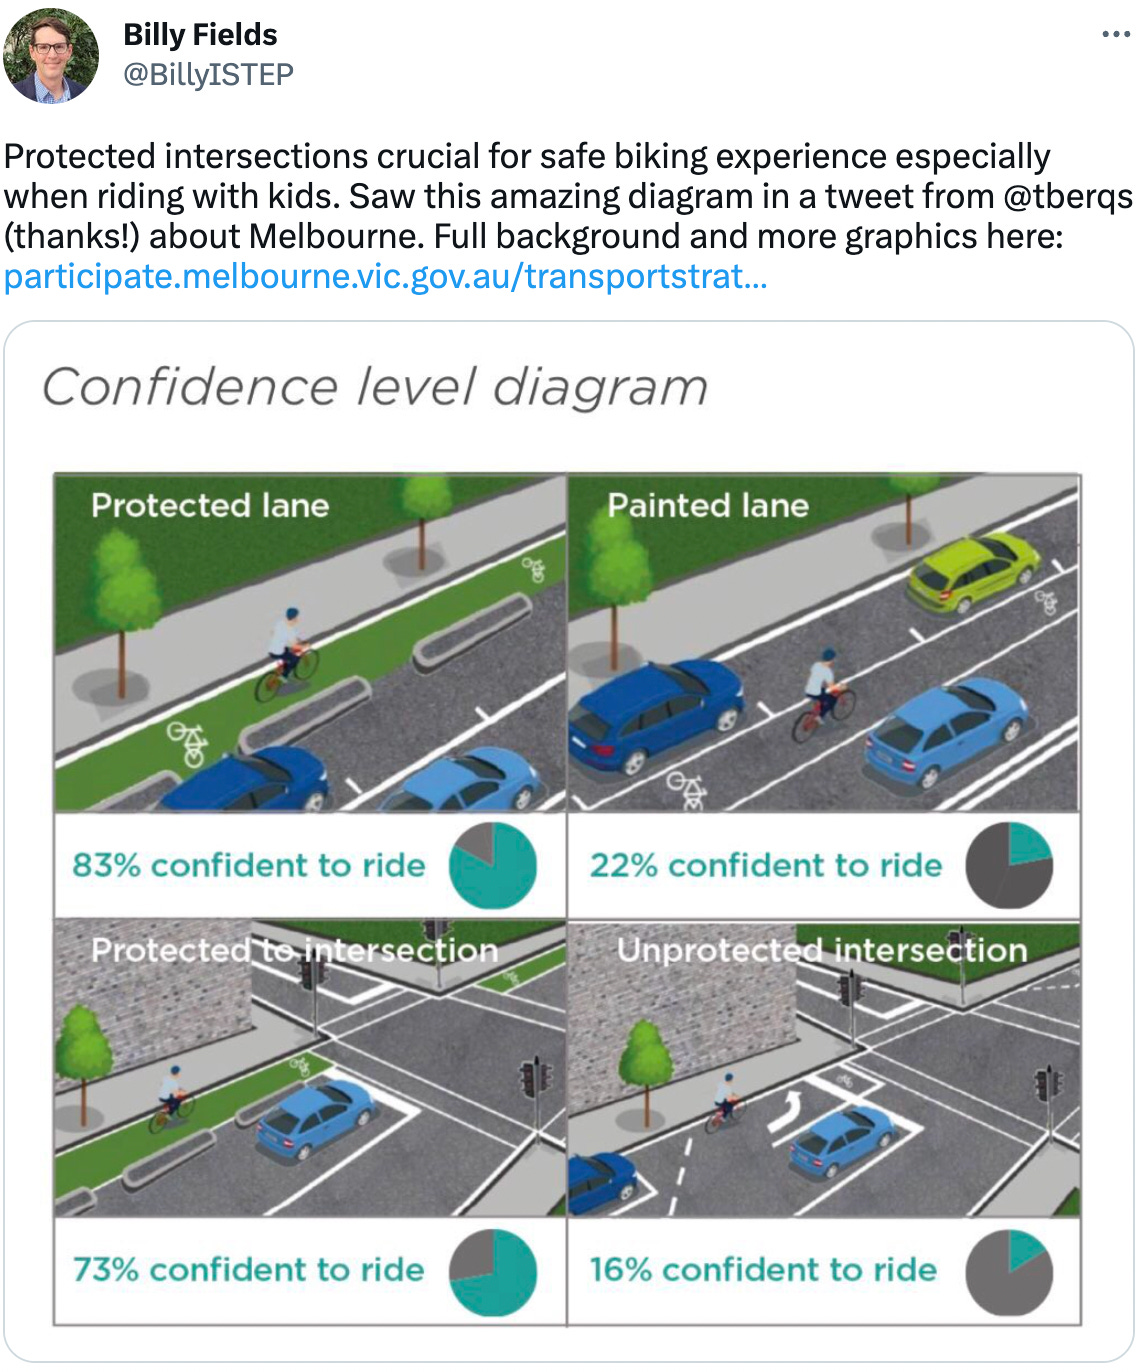  See new Tweets Conversation Billy Fields @BillyISTEP Protected intersections crucial for safe biking experience especially when riding with kids. Saw this amazing diagram in a tweet from @tberqs (thanks!) about Melbourne. Full background and more graphics here: https://participate.melbourne.vic.gov.au/transportstrategy/cycling